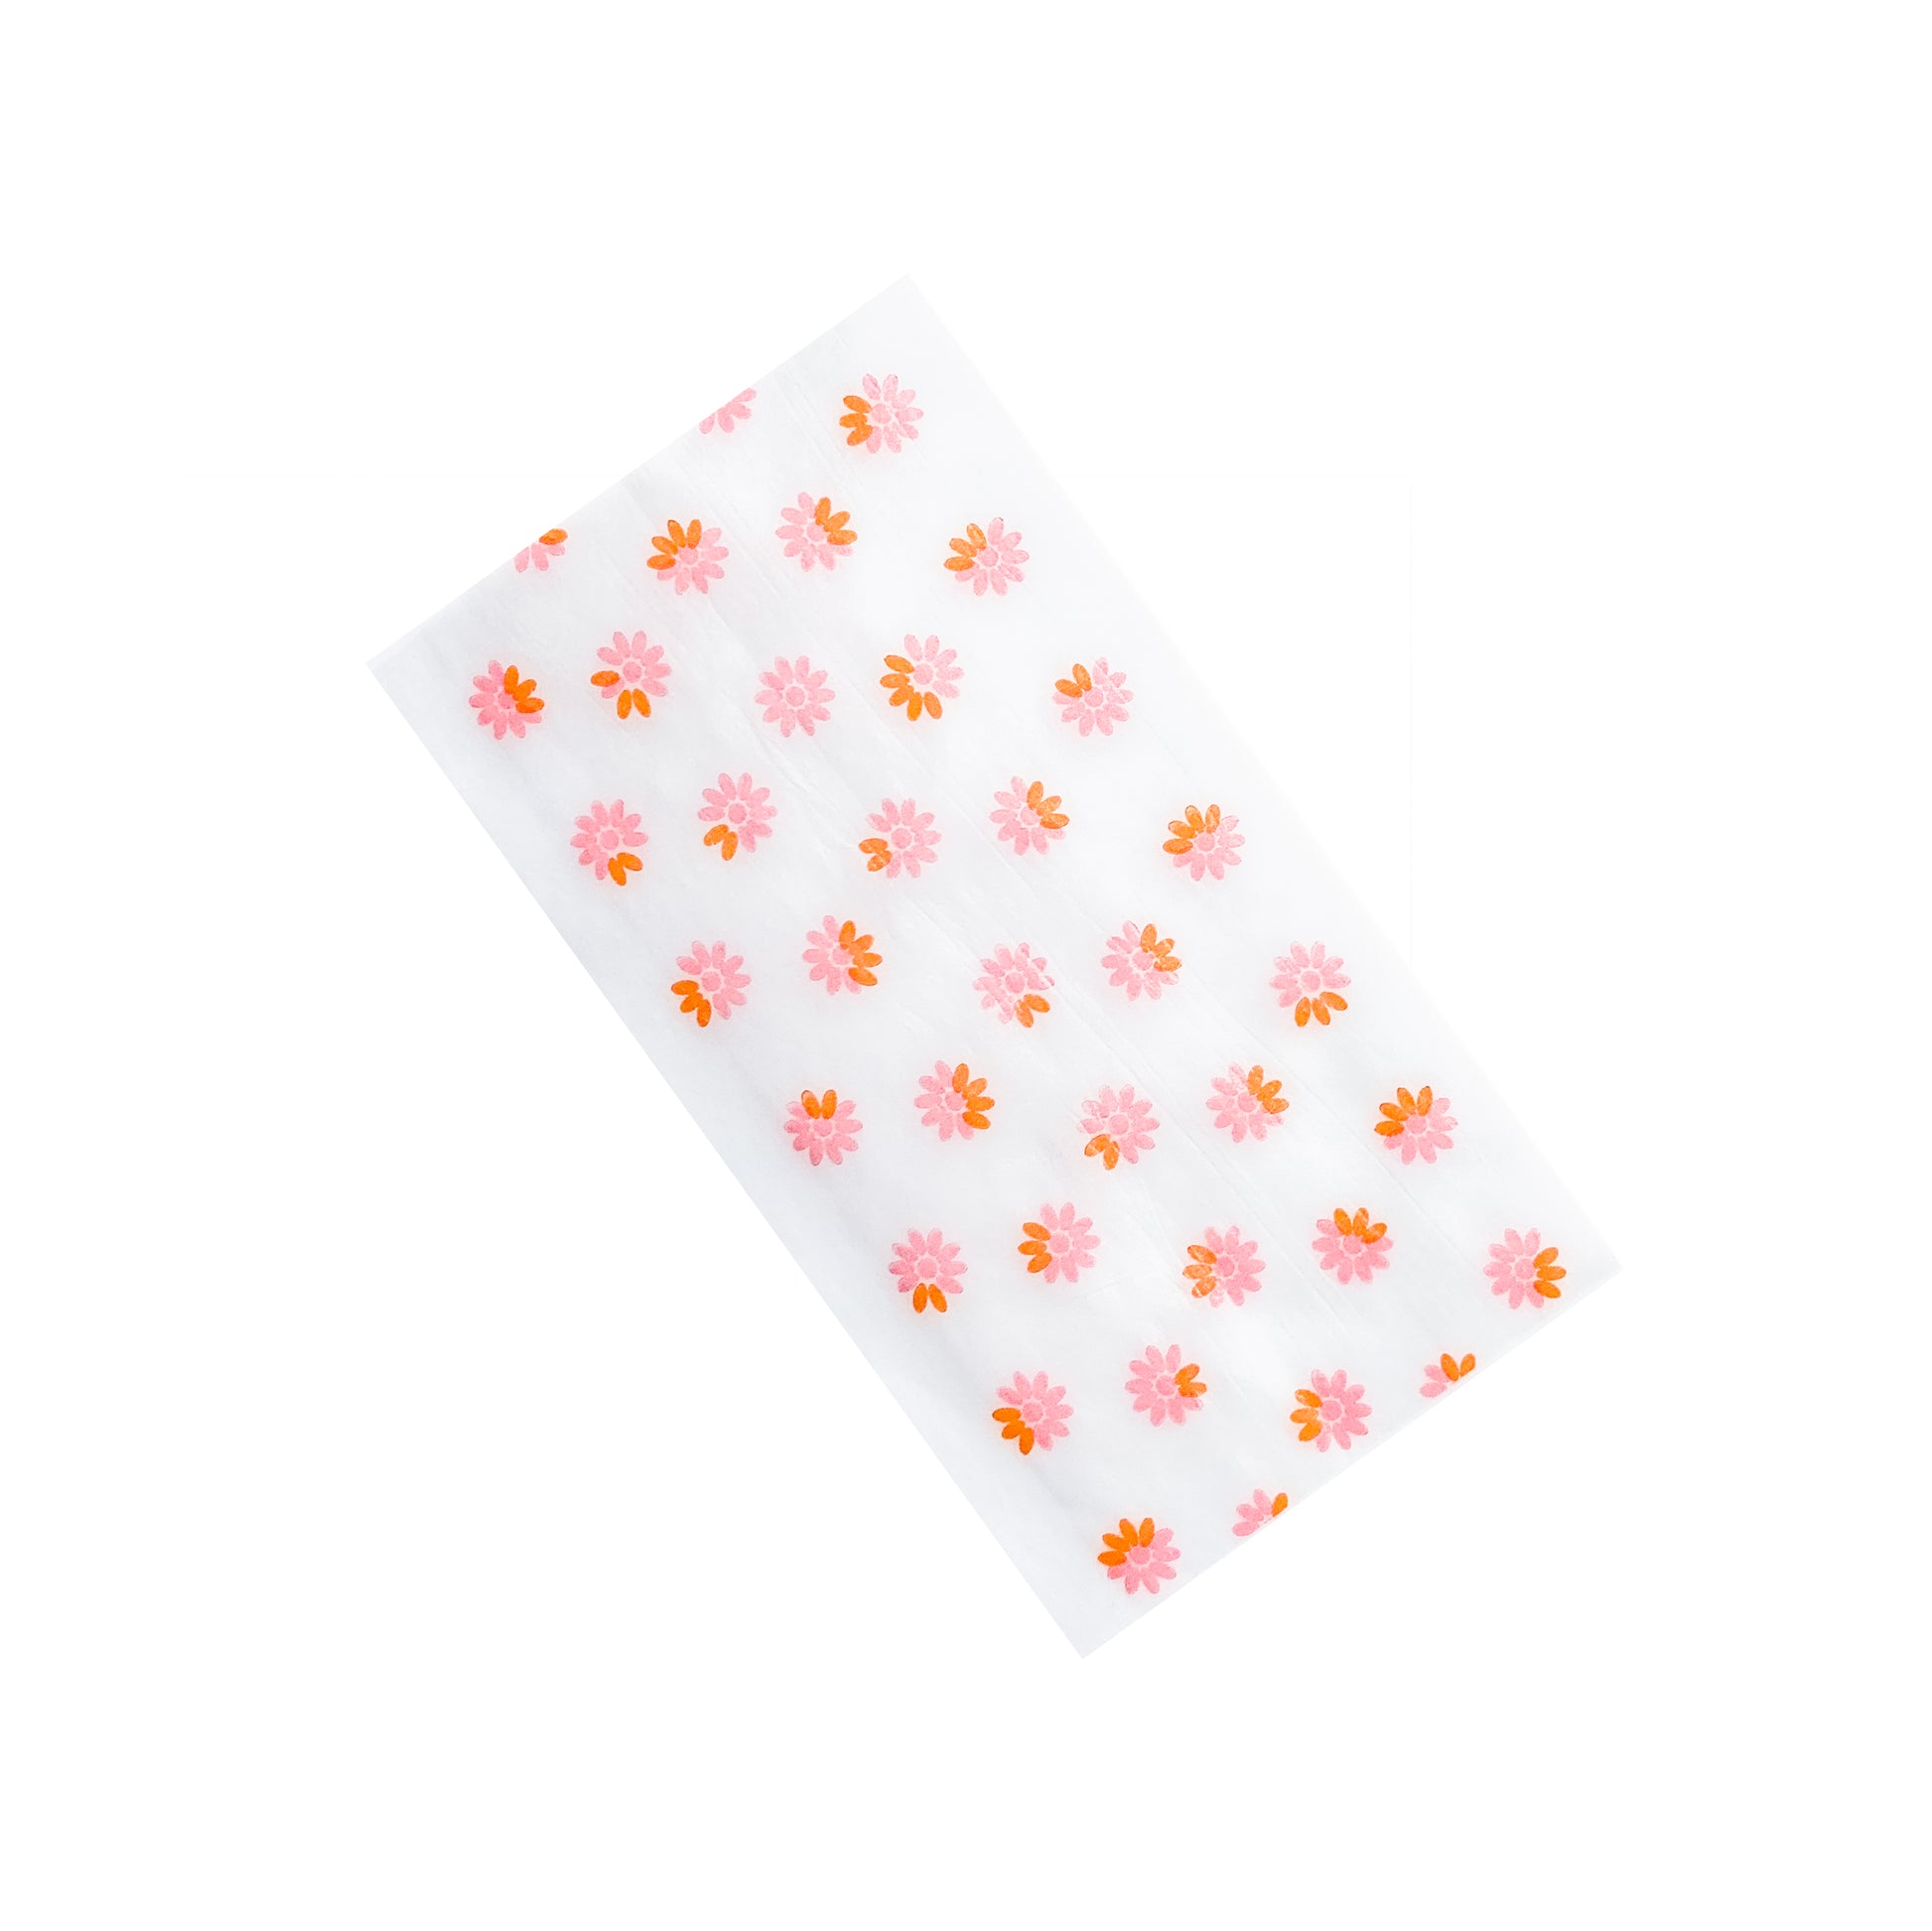 The Fleurt Papers, set of 10: pink and orange floral rolling papers. These designer rolling papers are girly, pretty, vegan, cute, cool, standard size, high quality, even burn, natural dyes, best tasting, slow burn.